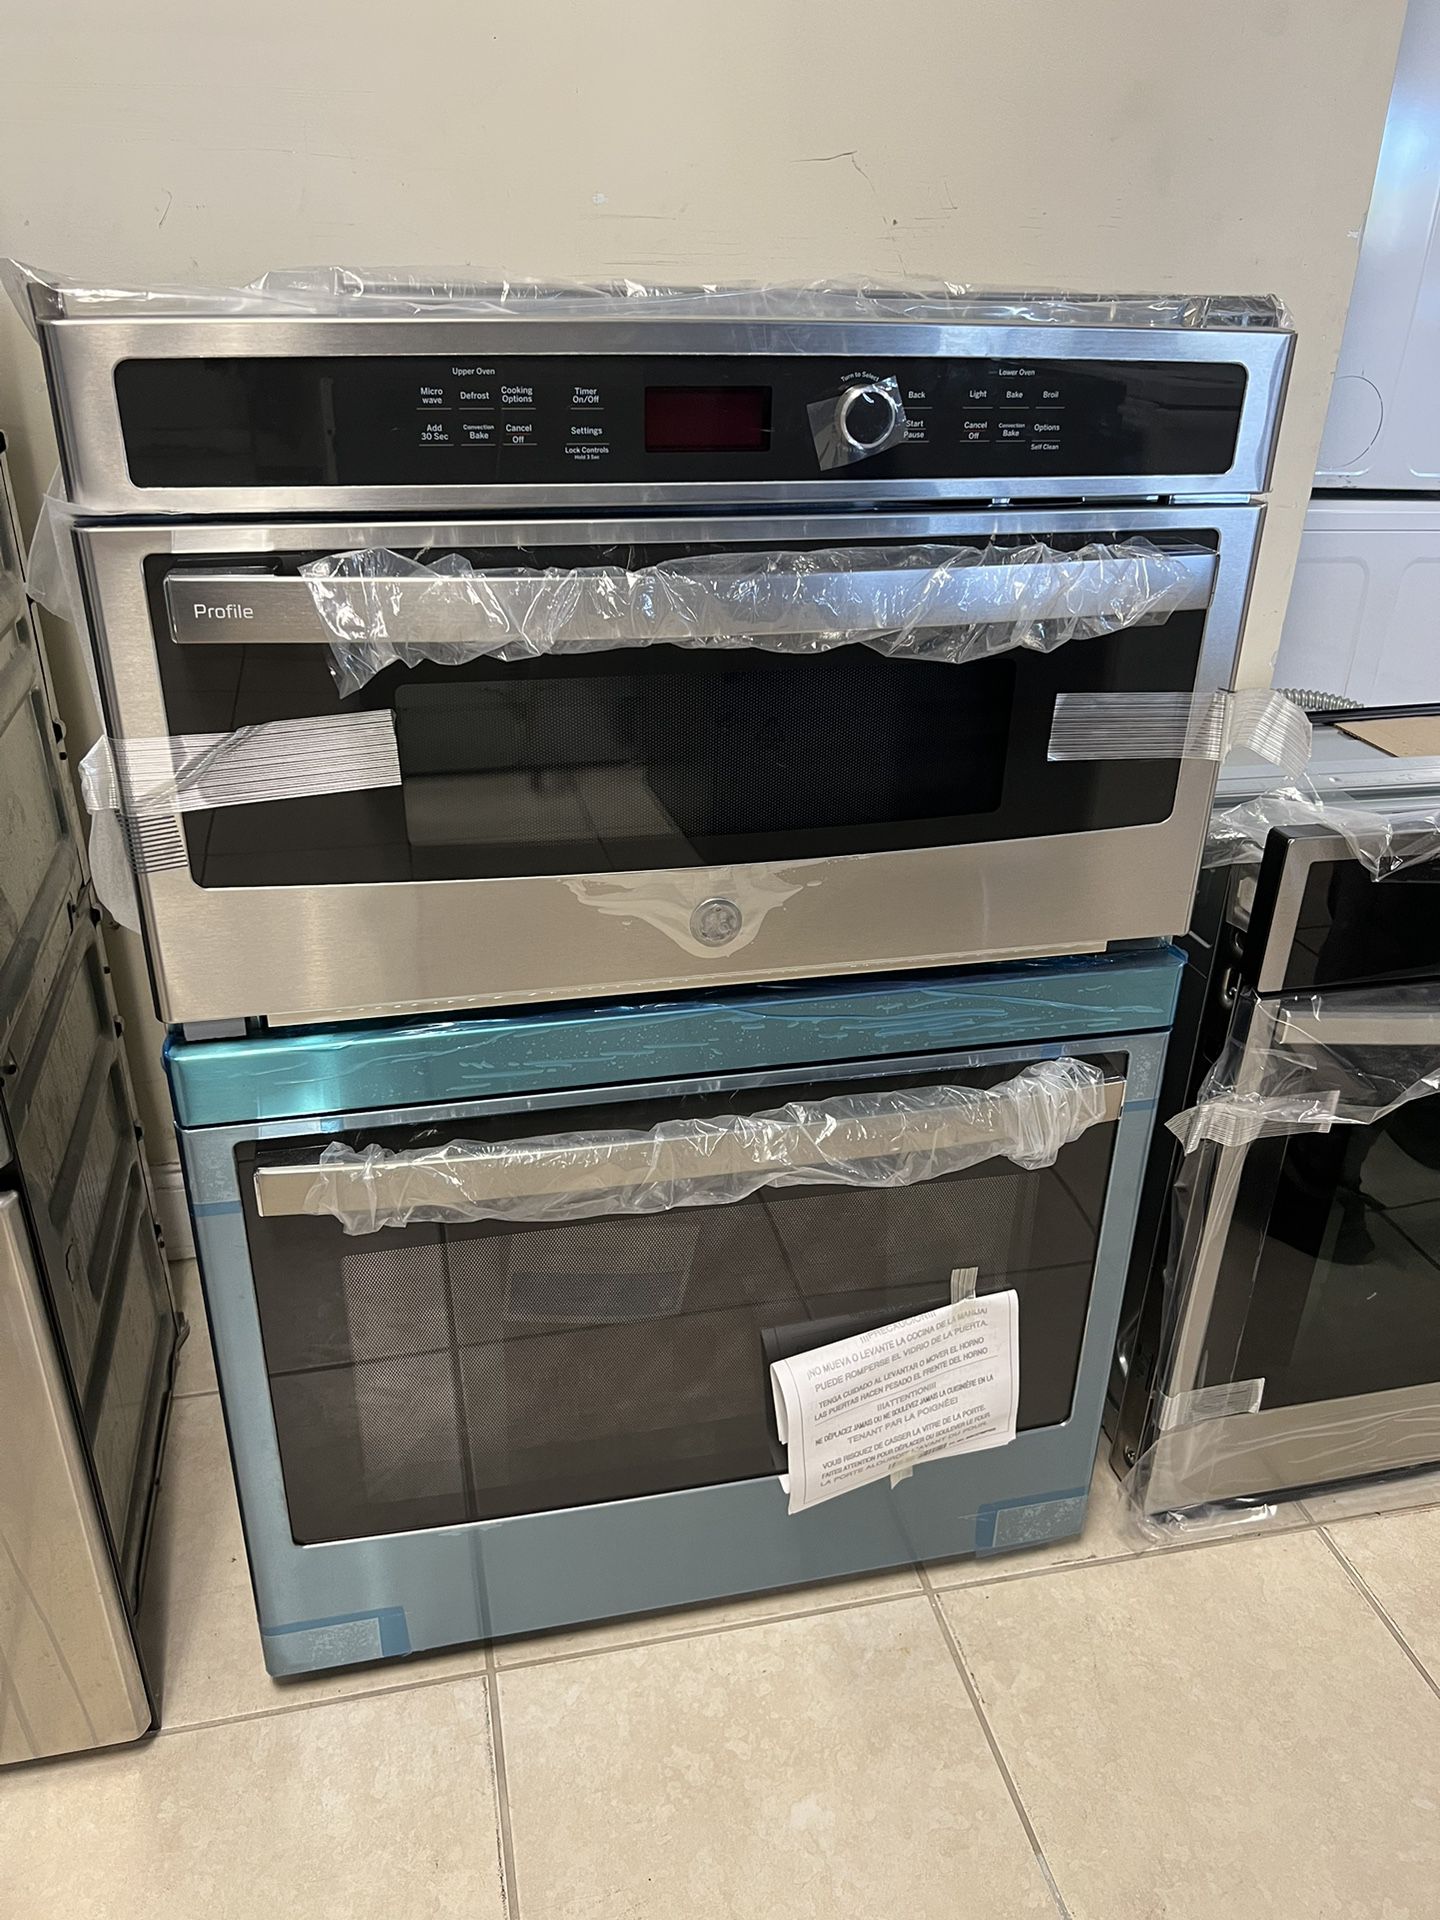 BRAND NEW SAMSUNG OVEN WALL AND MICROWAVE STAINLESS STEEL